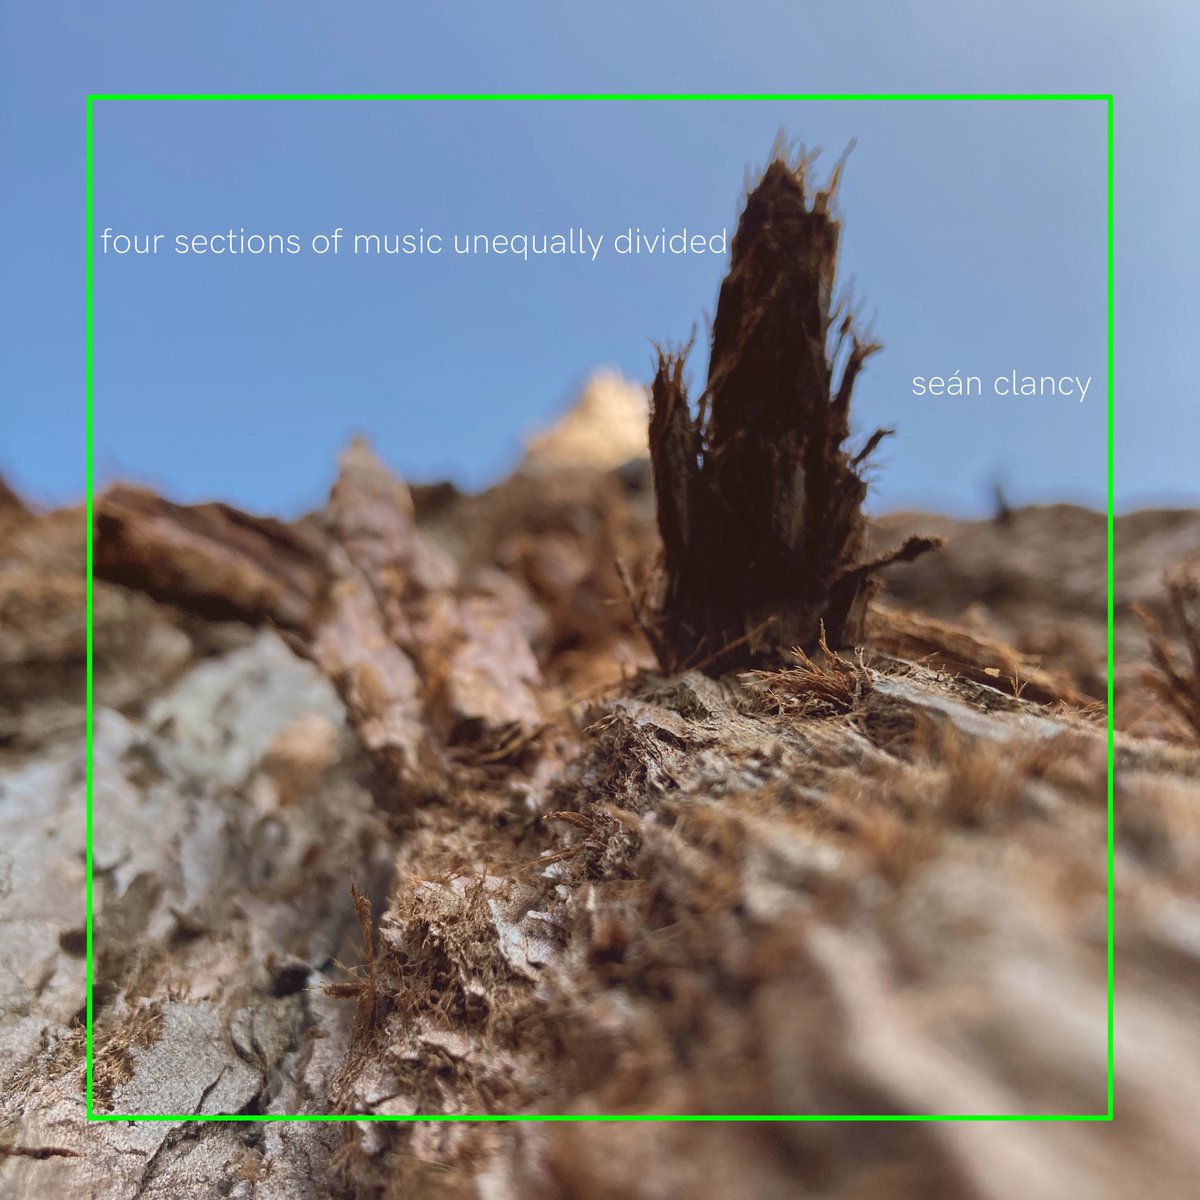 Hi folks, I have a new album out today called ‘4 sections of music unequally divided’ Has been described by @theQuietus as ‘projecting a soothing warmth’ Available on @Bandcamp here: seanclancy.bandcamp.com/album/four-sec… and everywhere else here: birminghamrecordcompany.lnk.to/4SofED Hope you enjoy!